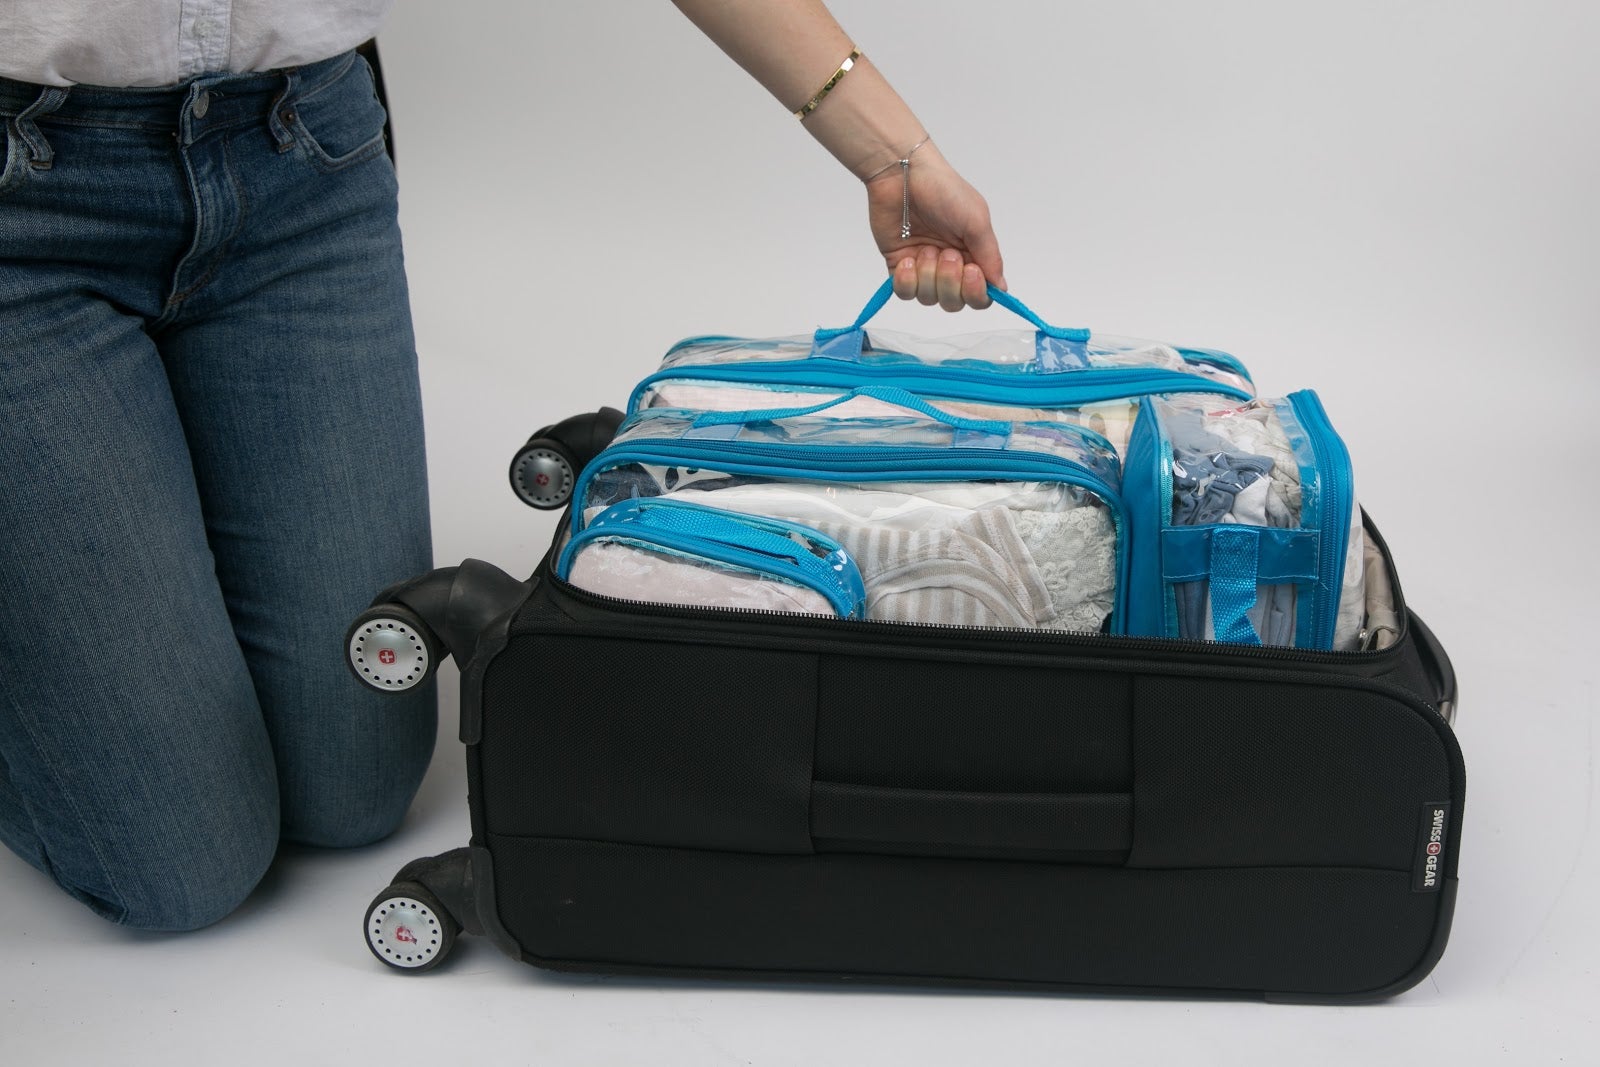 Turquoise packing cubes best system for carry on luggage